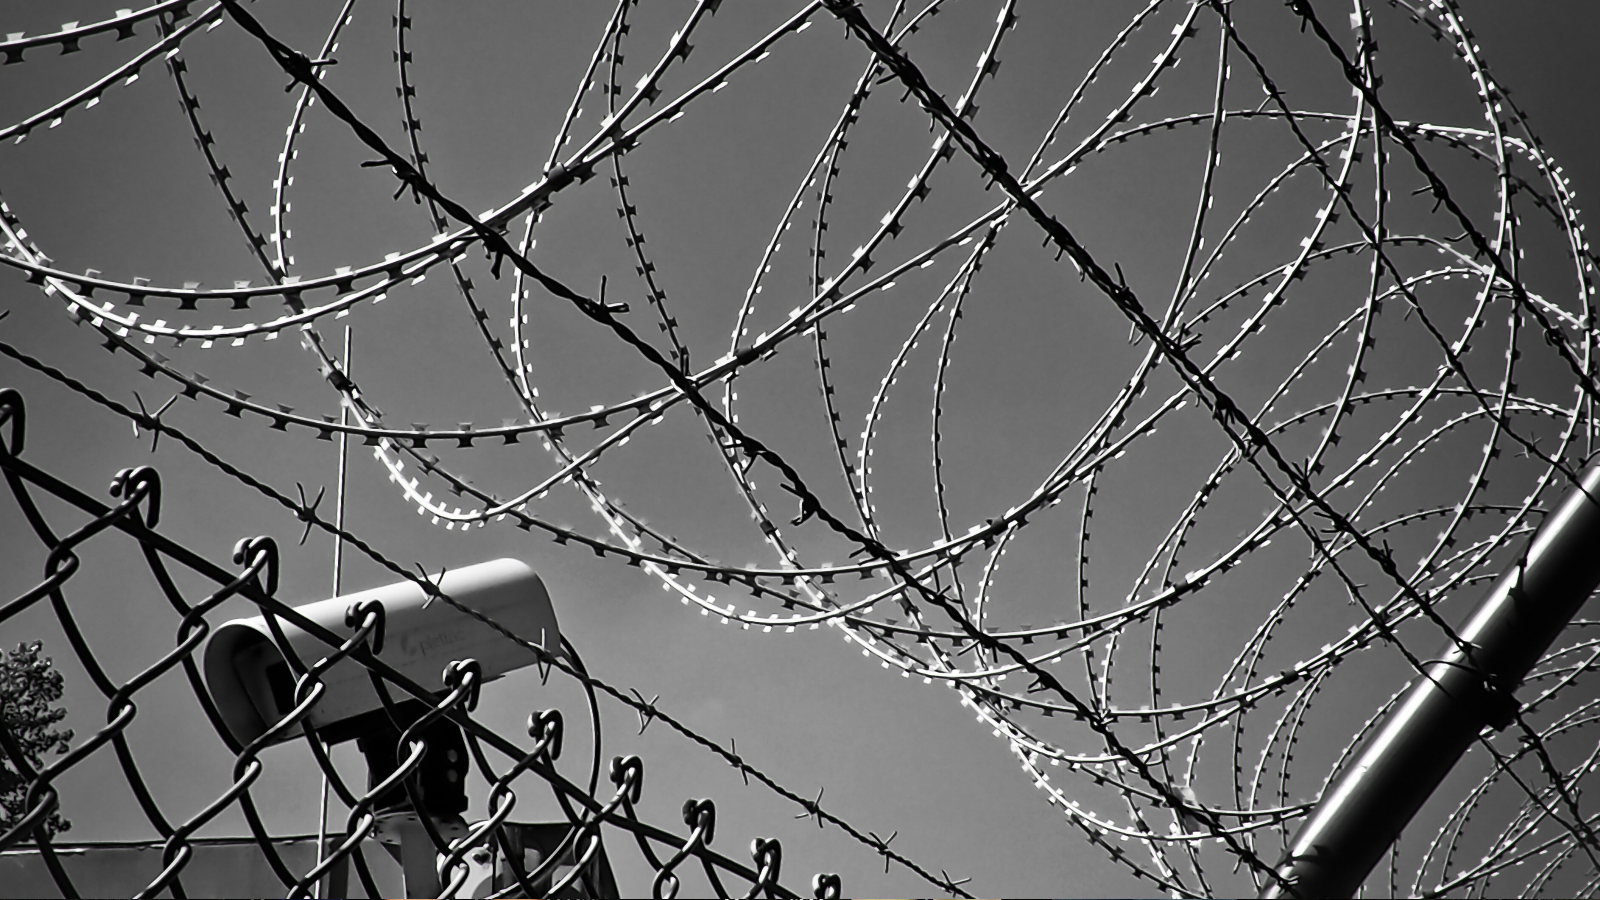 A close-up black and white image of a barbwired fence with a security camera in teh background.